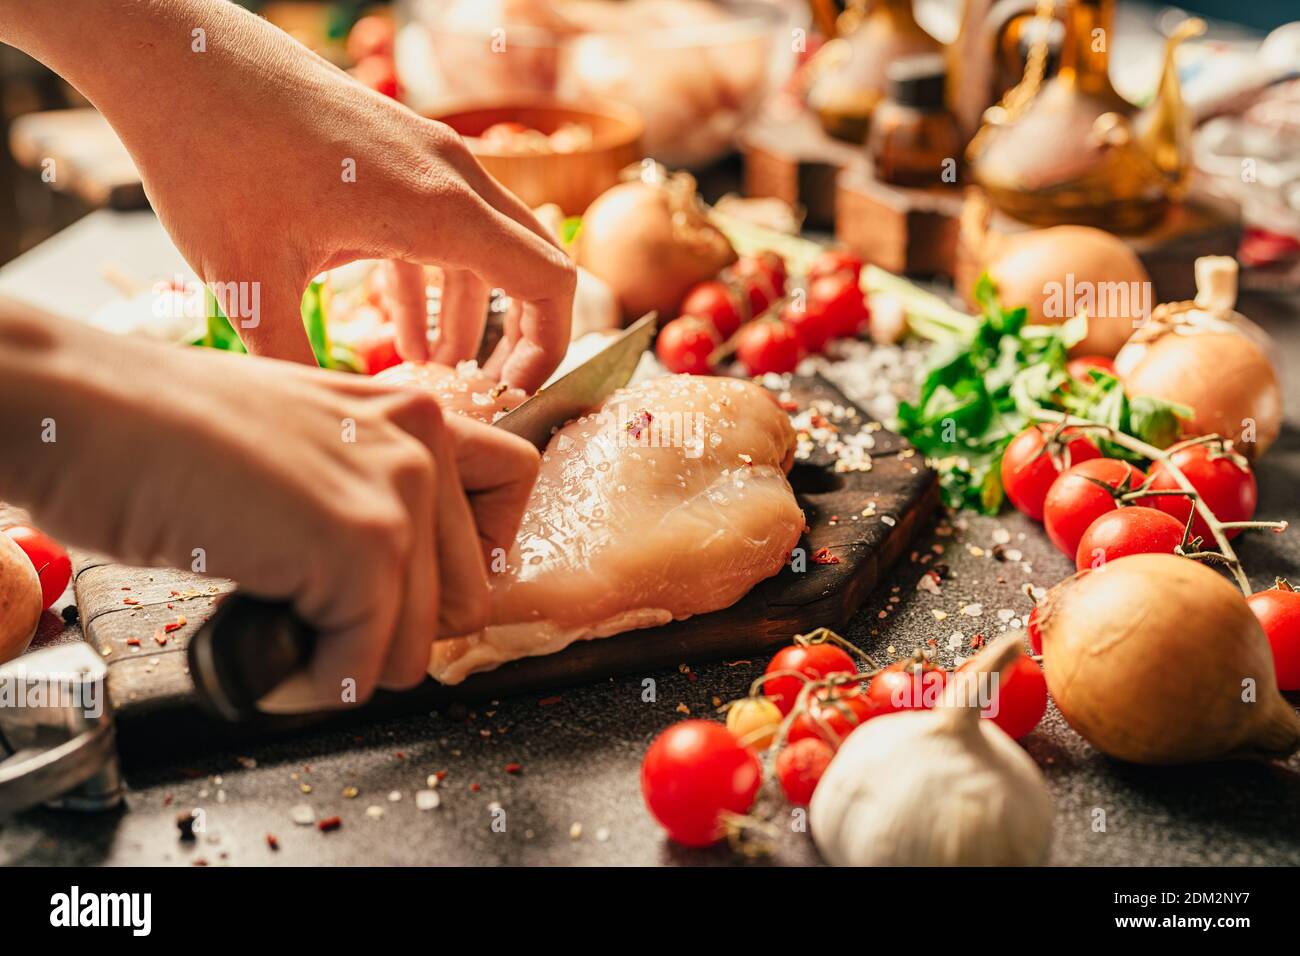 Housewife's hands cutting the fresh skinless boneless chicken breast with a knife on a wooden board.Seasoning and preparing raw chicken meat for lunch Stock Photo